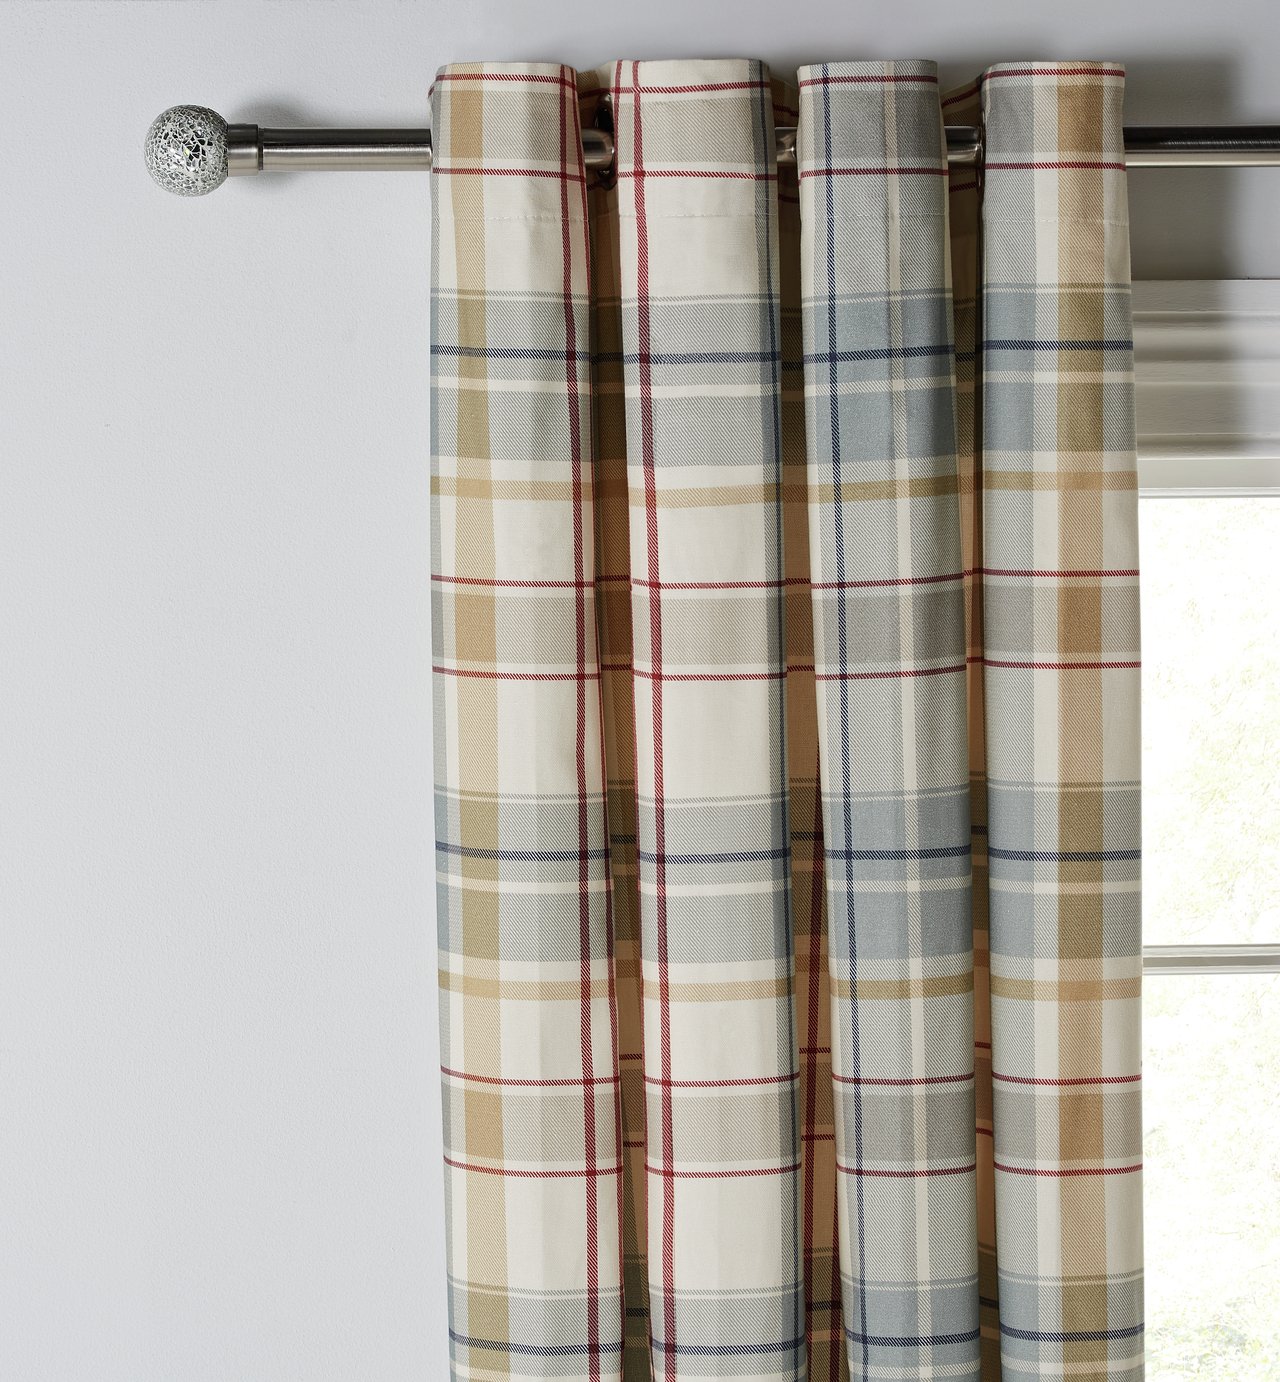 Argos Home Printed Check Lined Eyelet Curtains - Grey